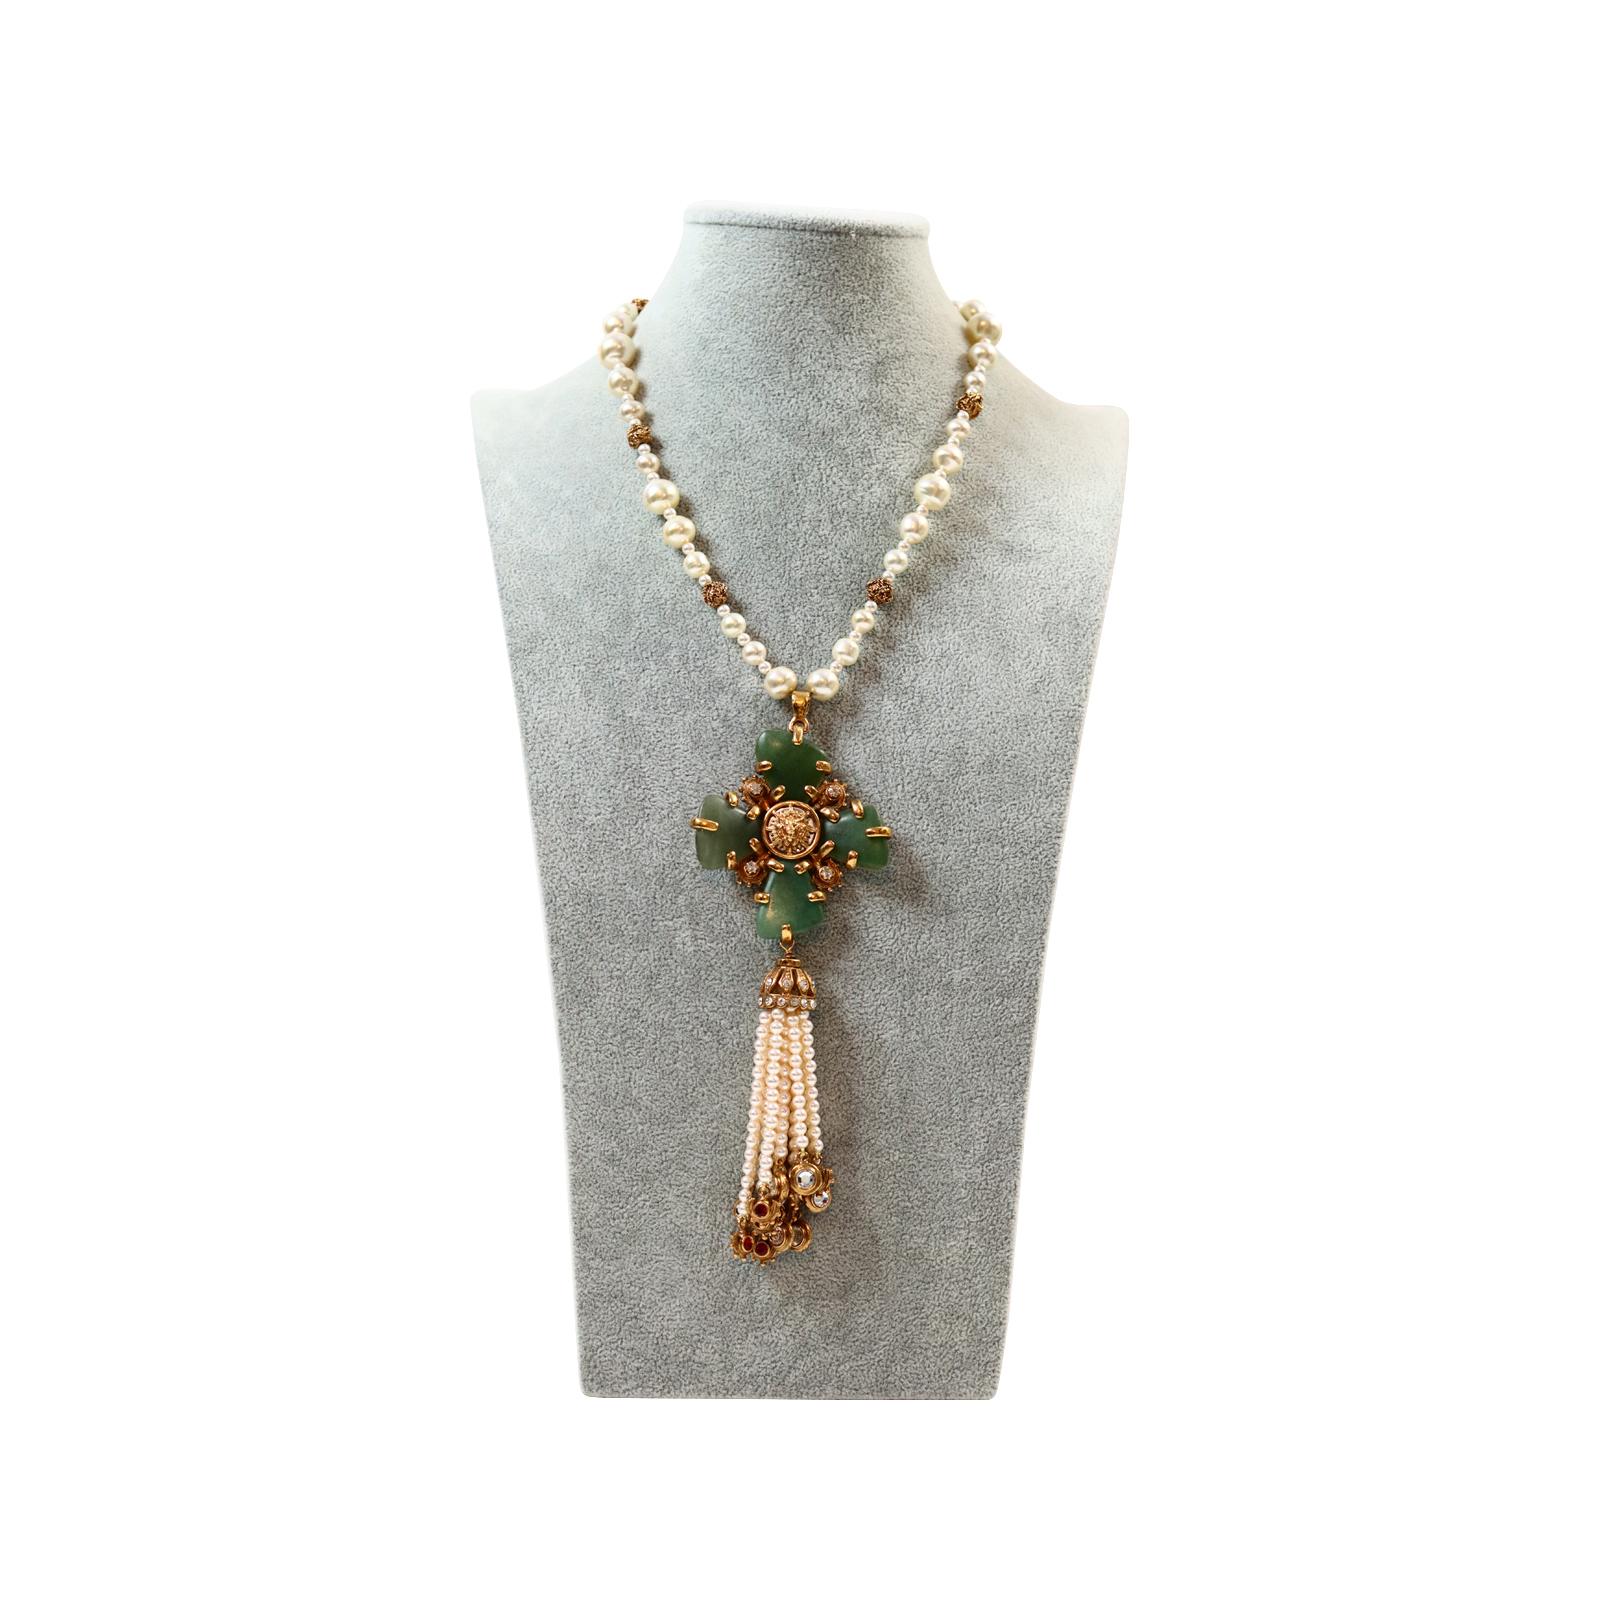 Artist Collectible Chanel Couture Pearl with Green Cross and Dangling Pearls Circa 2005 For Sale